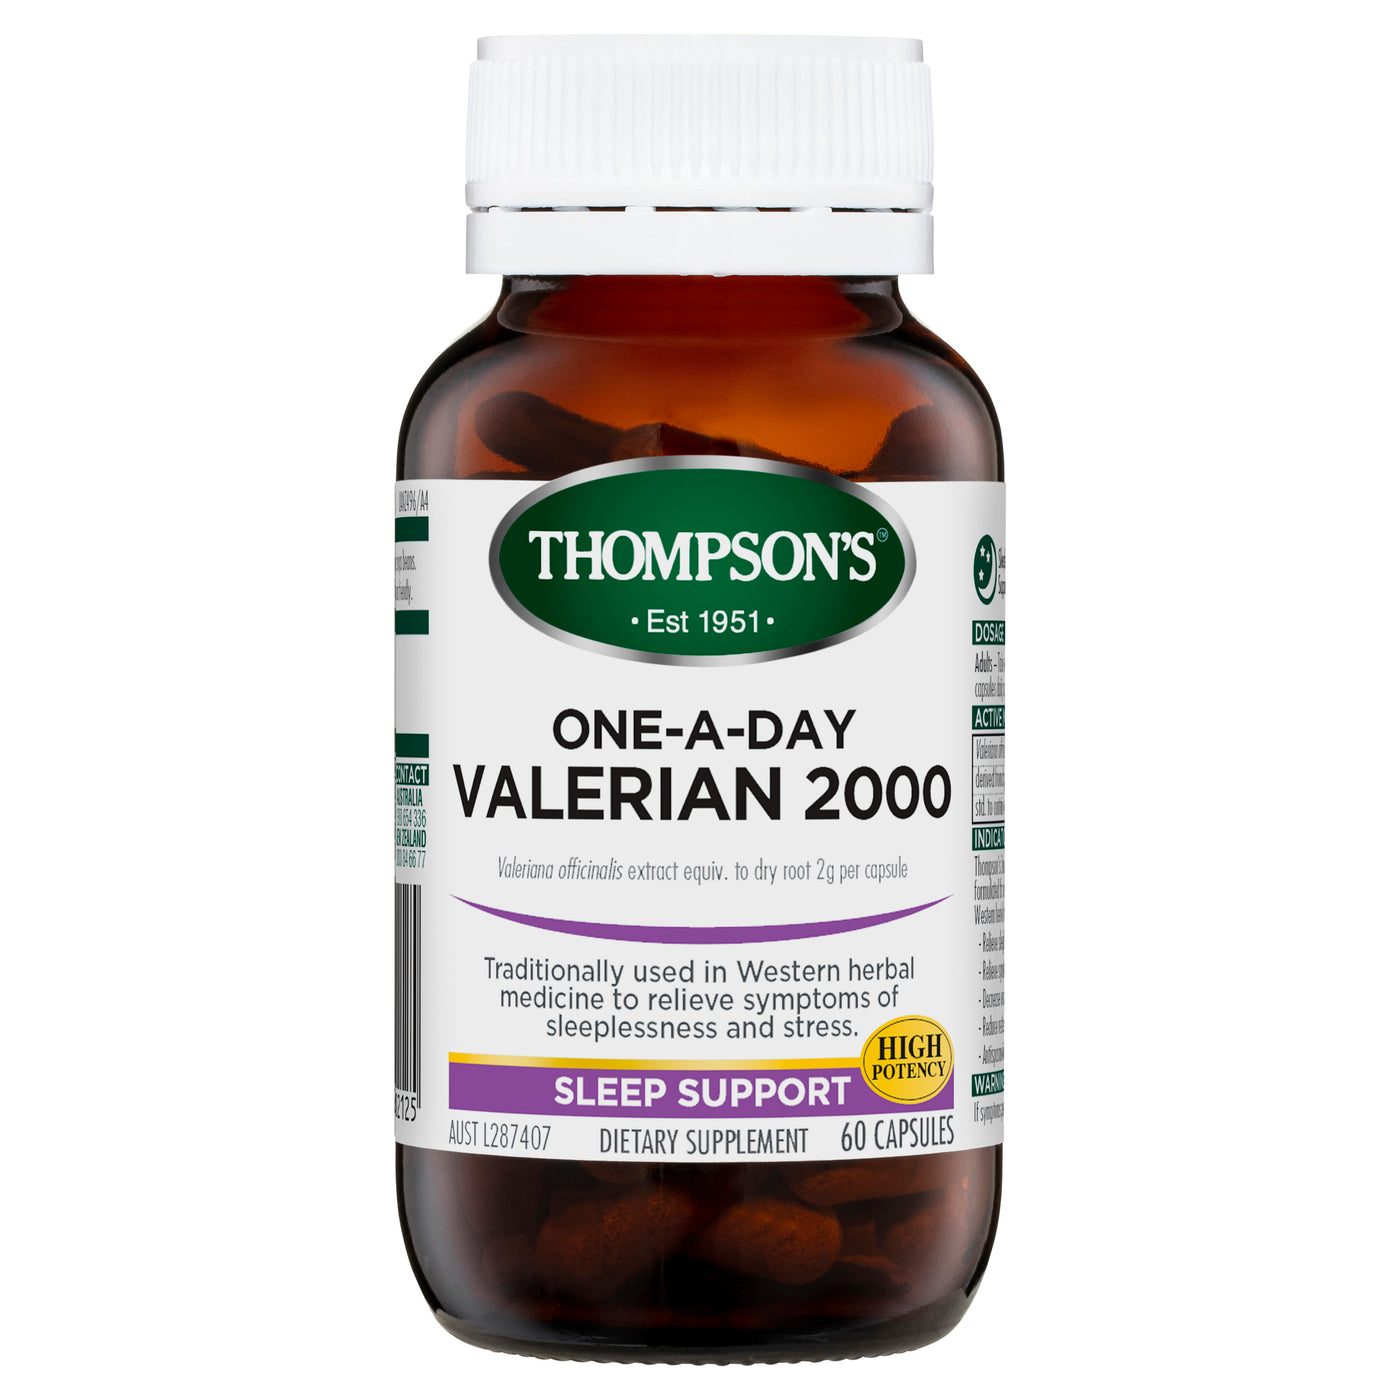 Thompsons 1 a day Valerian 60 capsules